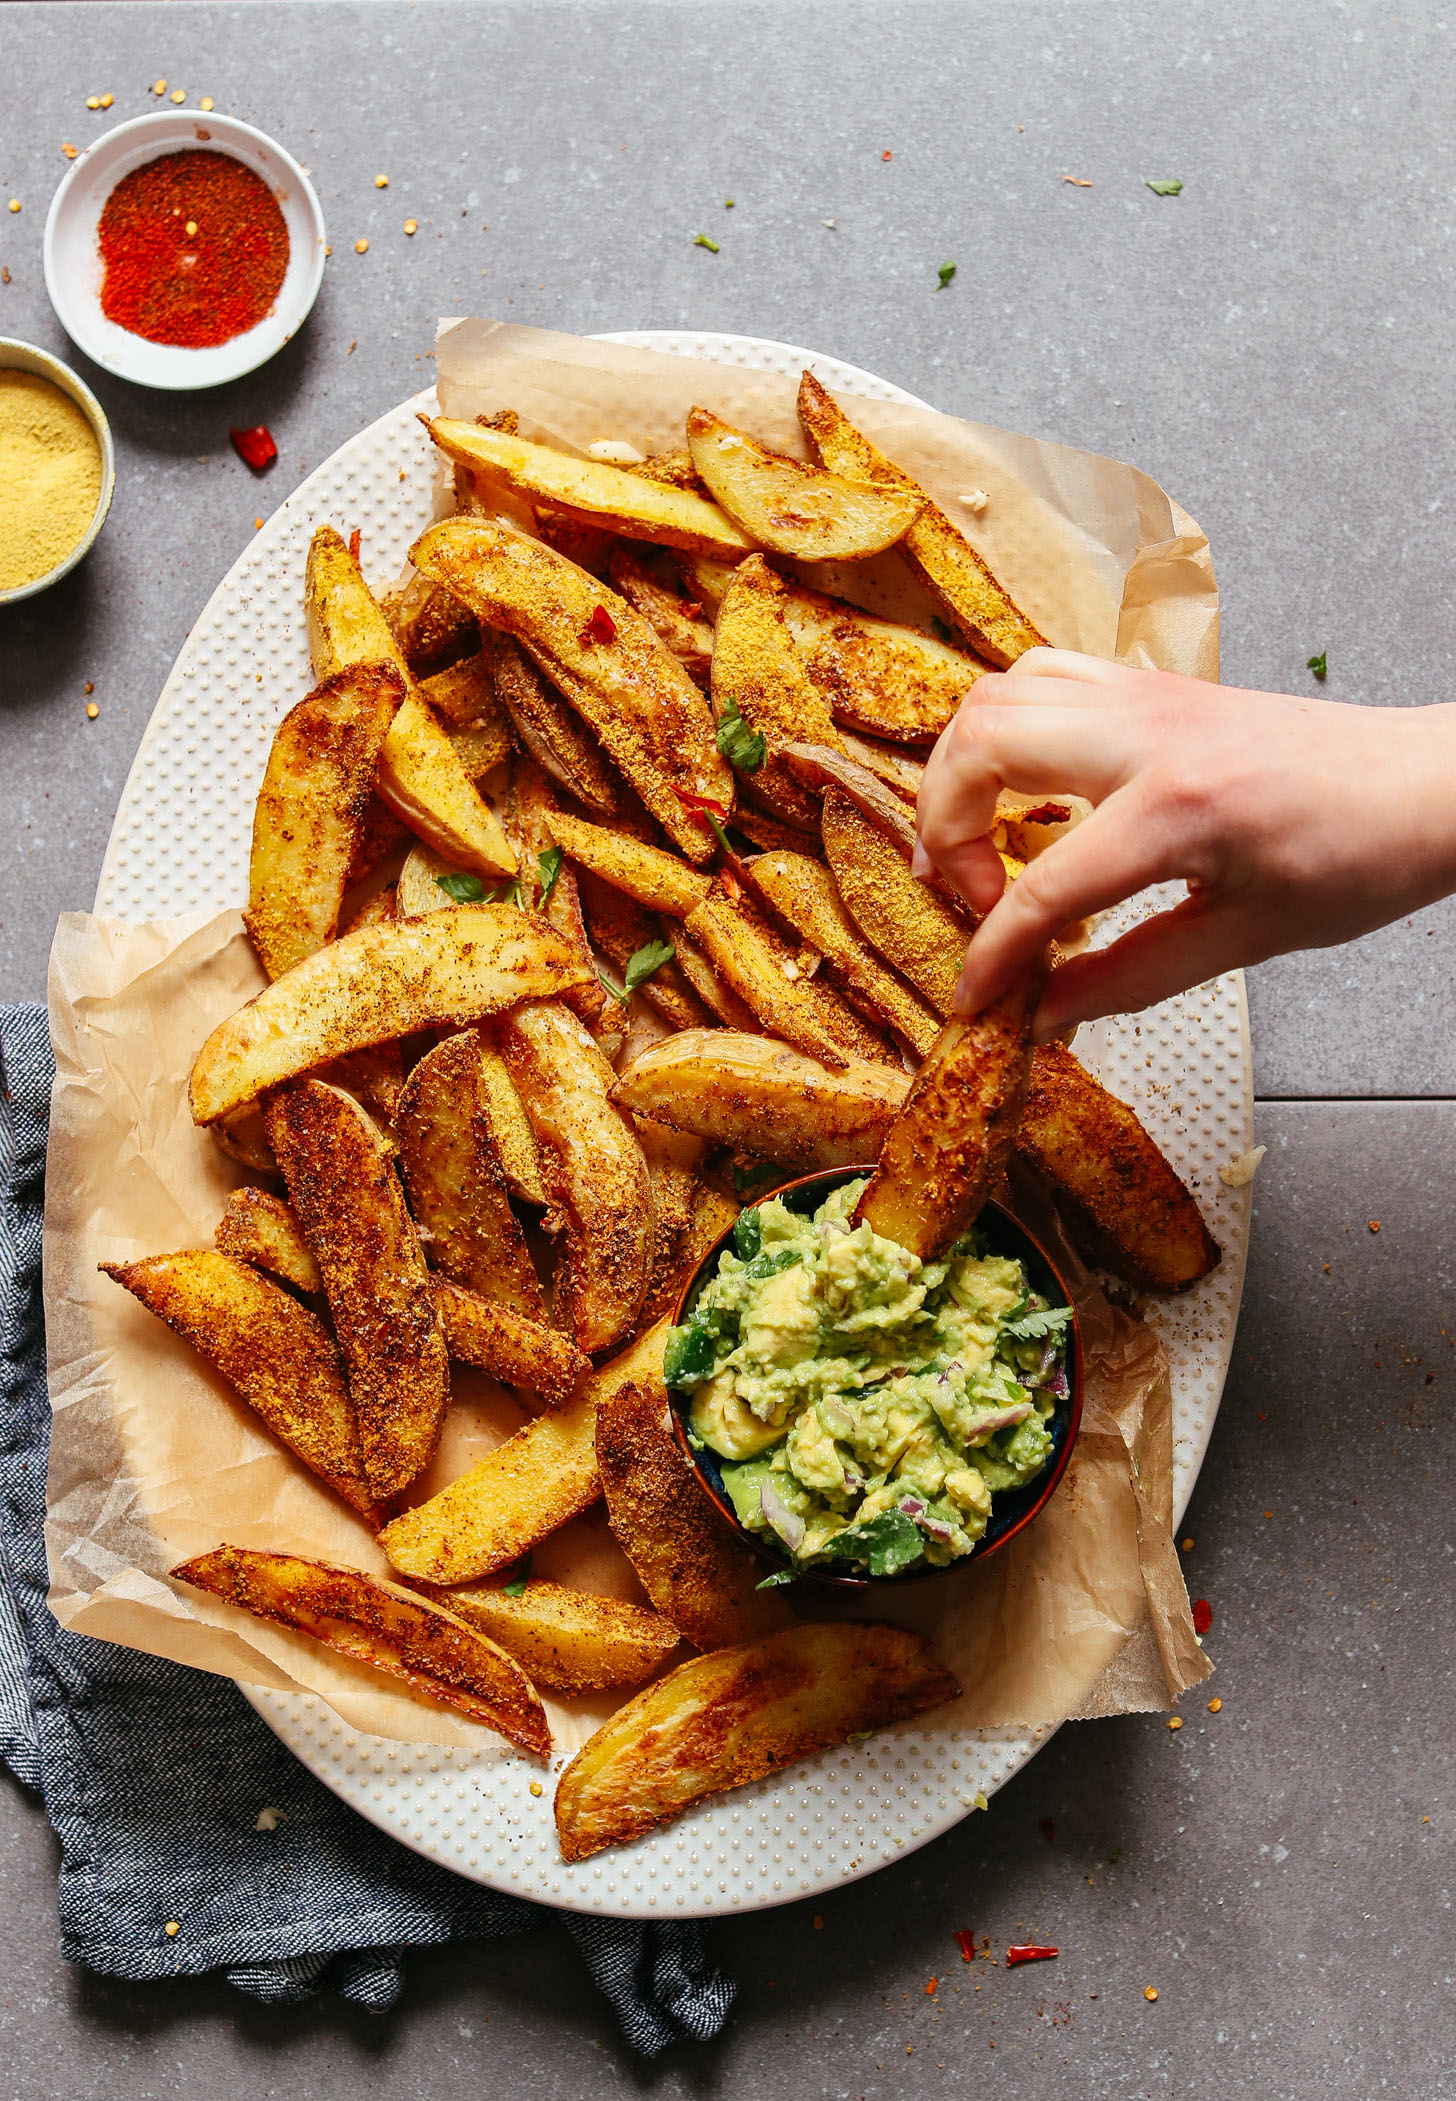 Dipping a Potato Fry with Cheesy-Chili seasoning into a bowl of guacamole